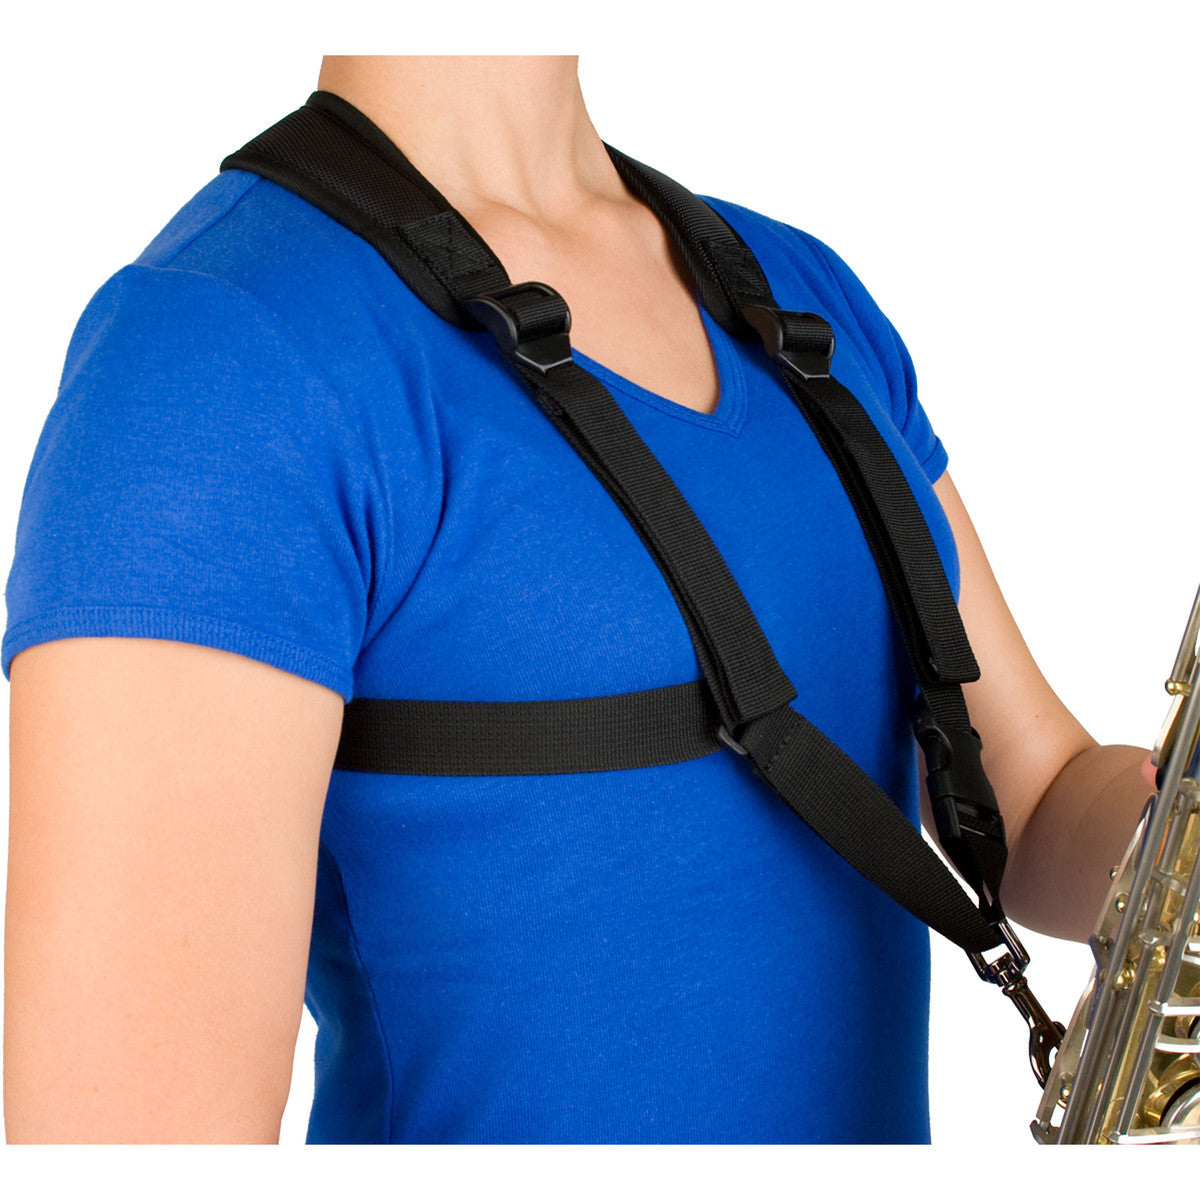 Protec Small Universal Saxophone Harness with Metal Snap Hooks